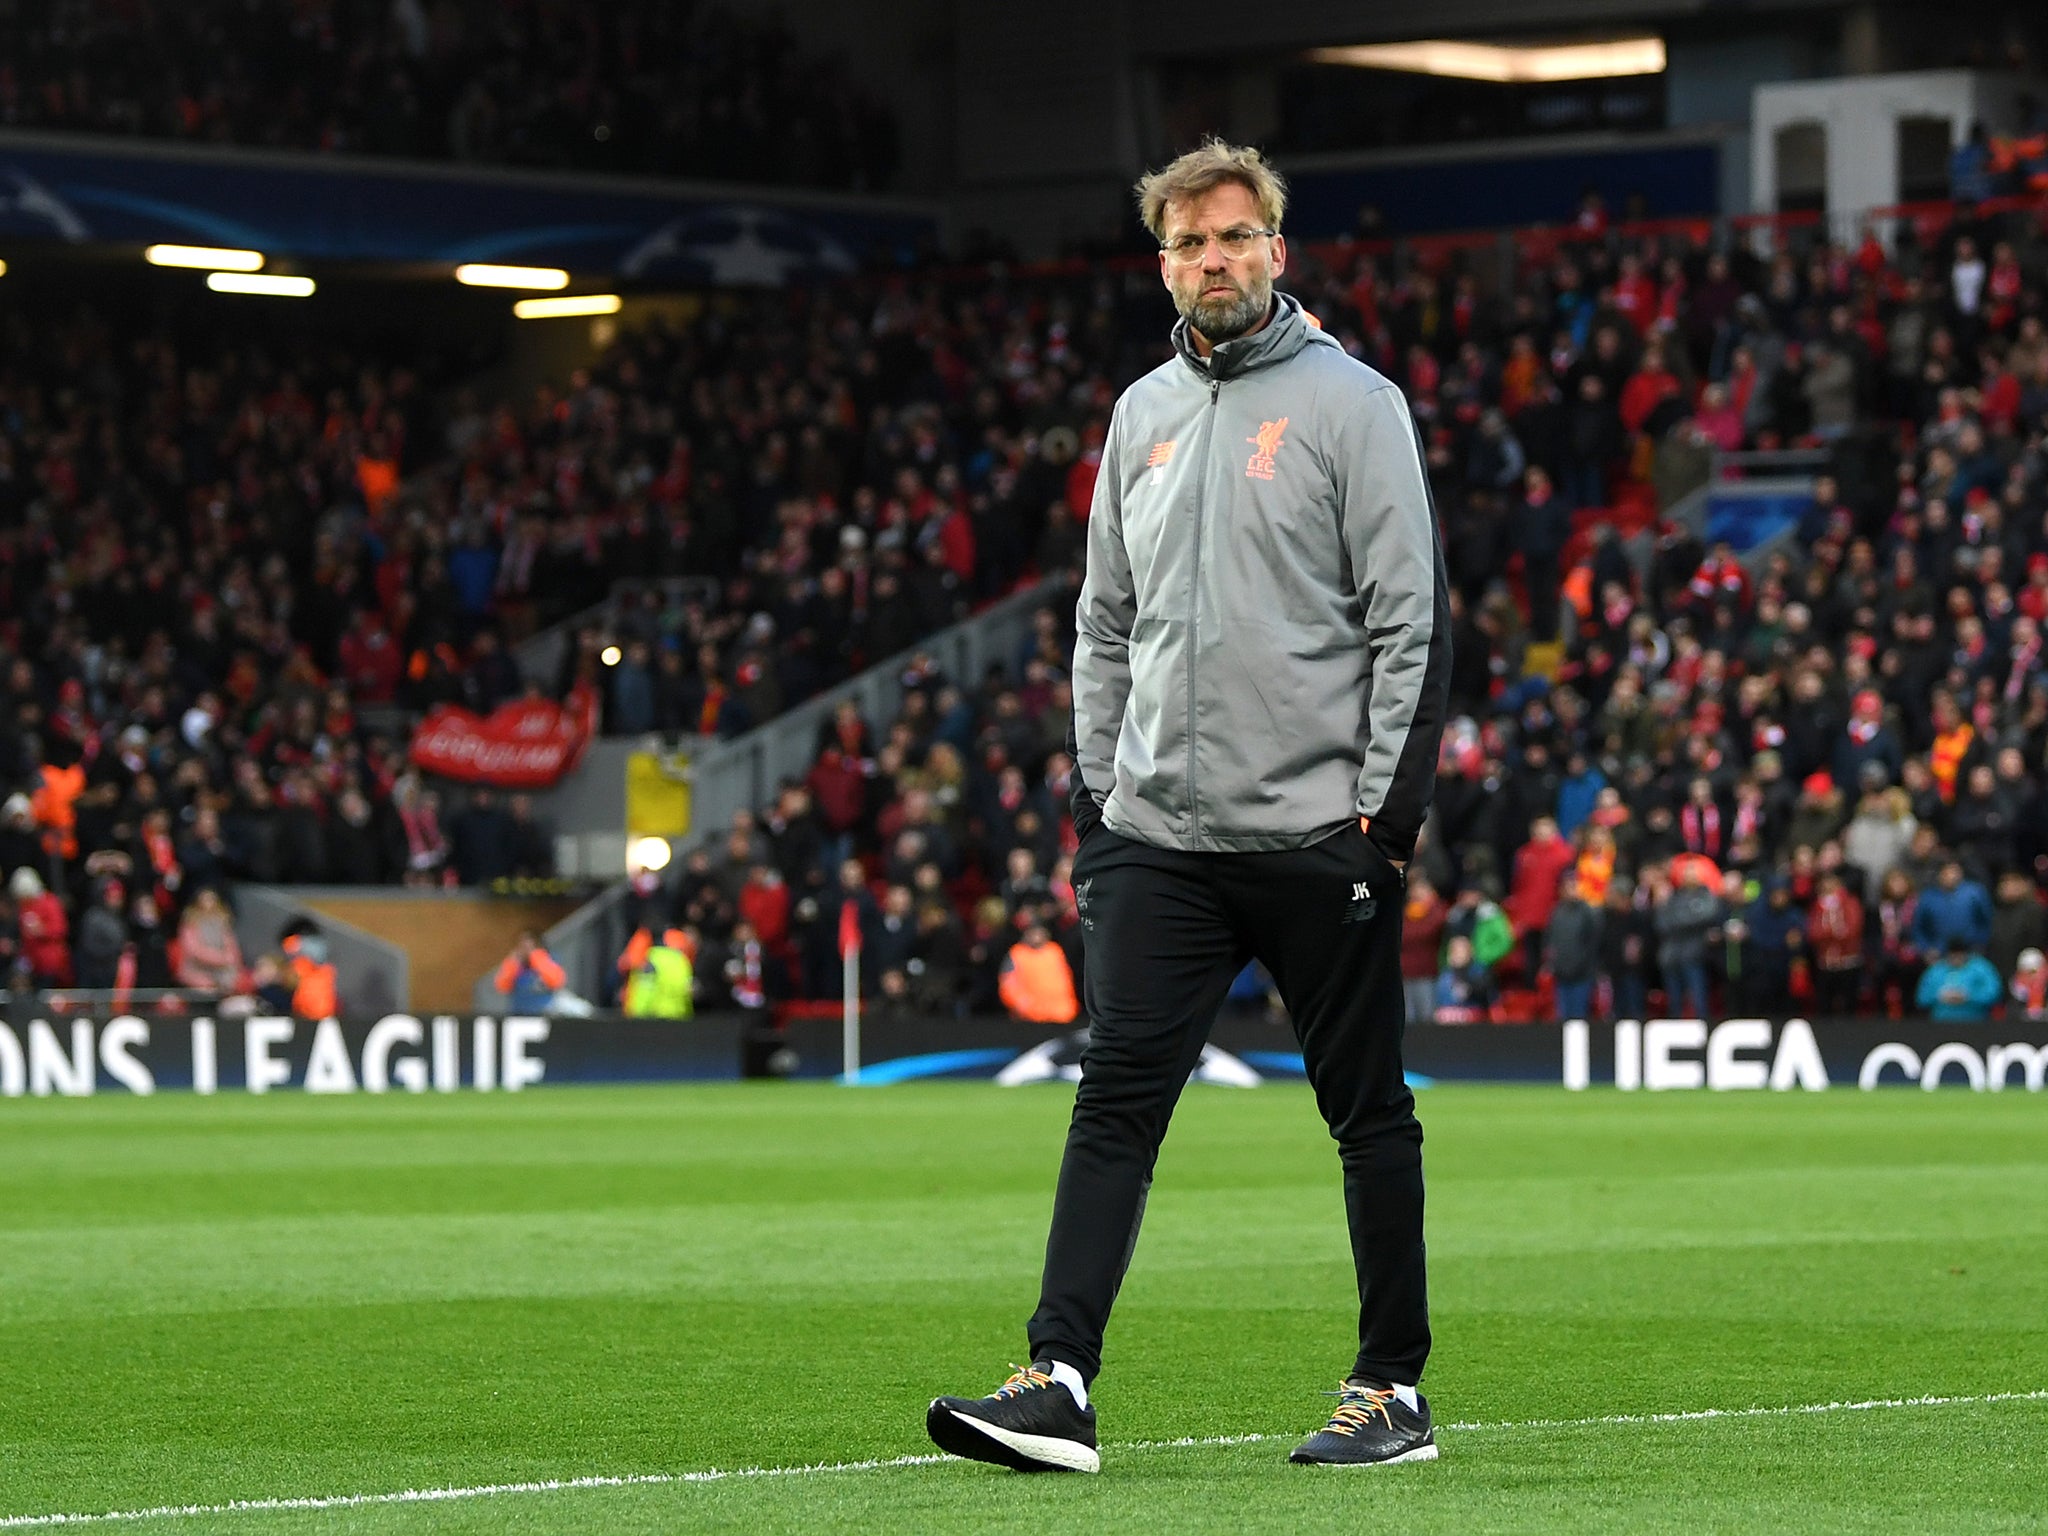 Would Jürgen Klopp approve of the trial happening in a Champions League quarter-final?